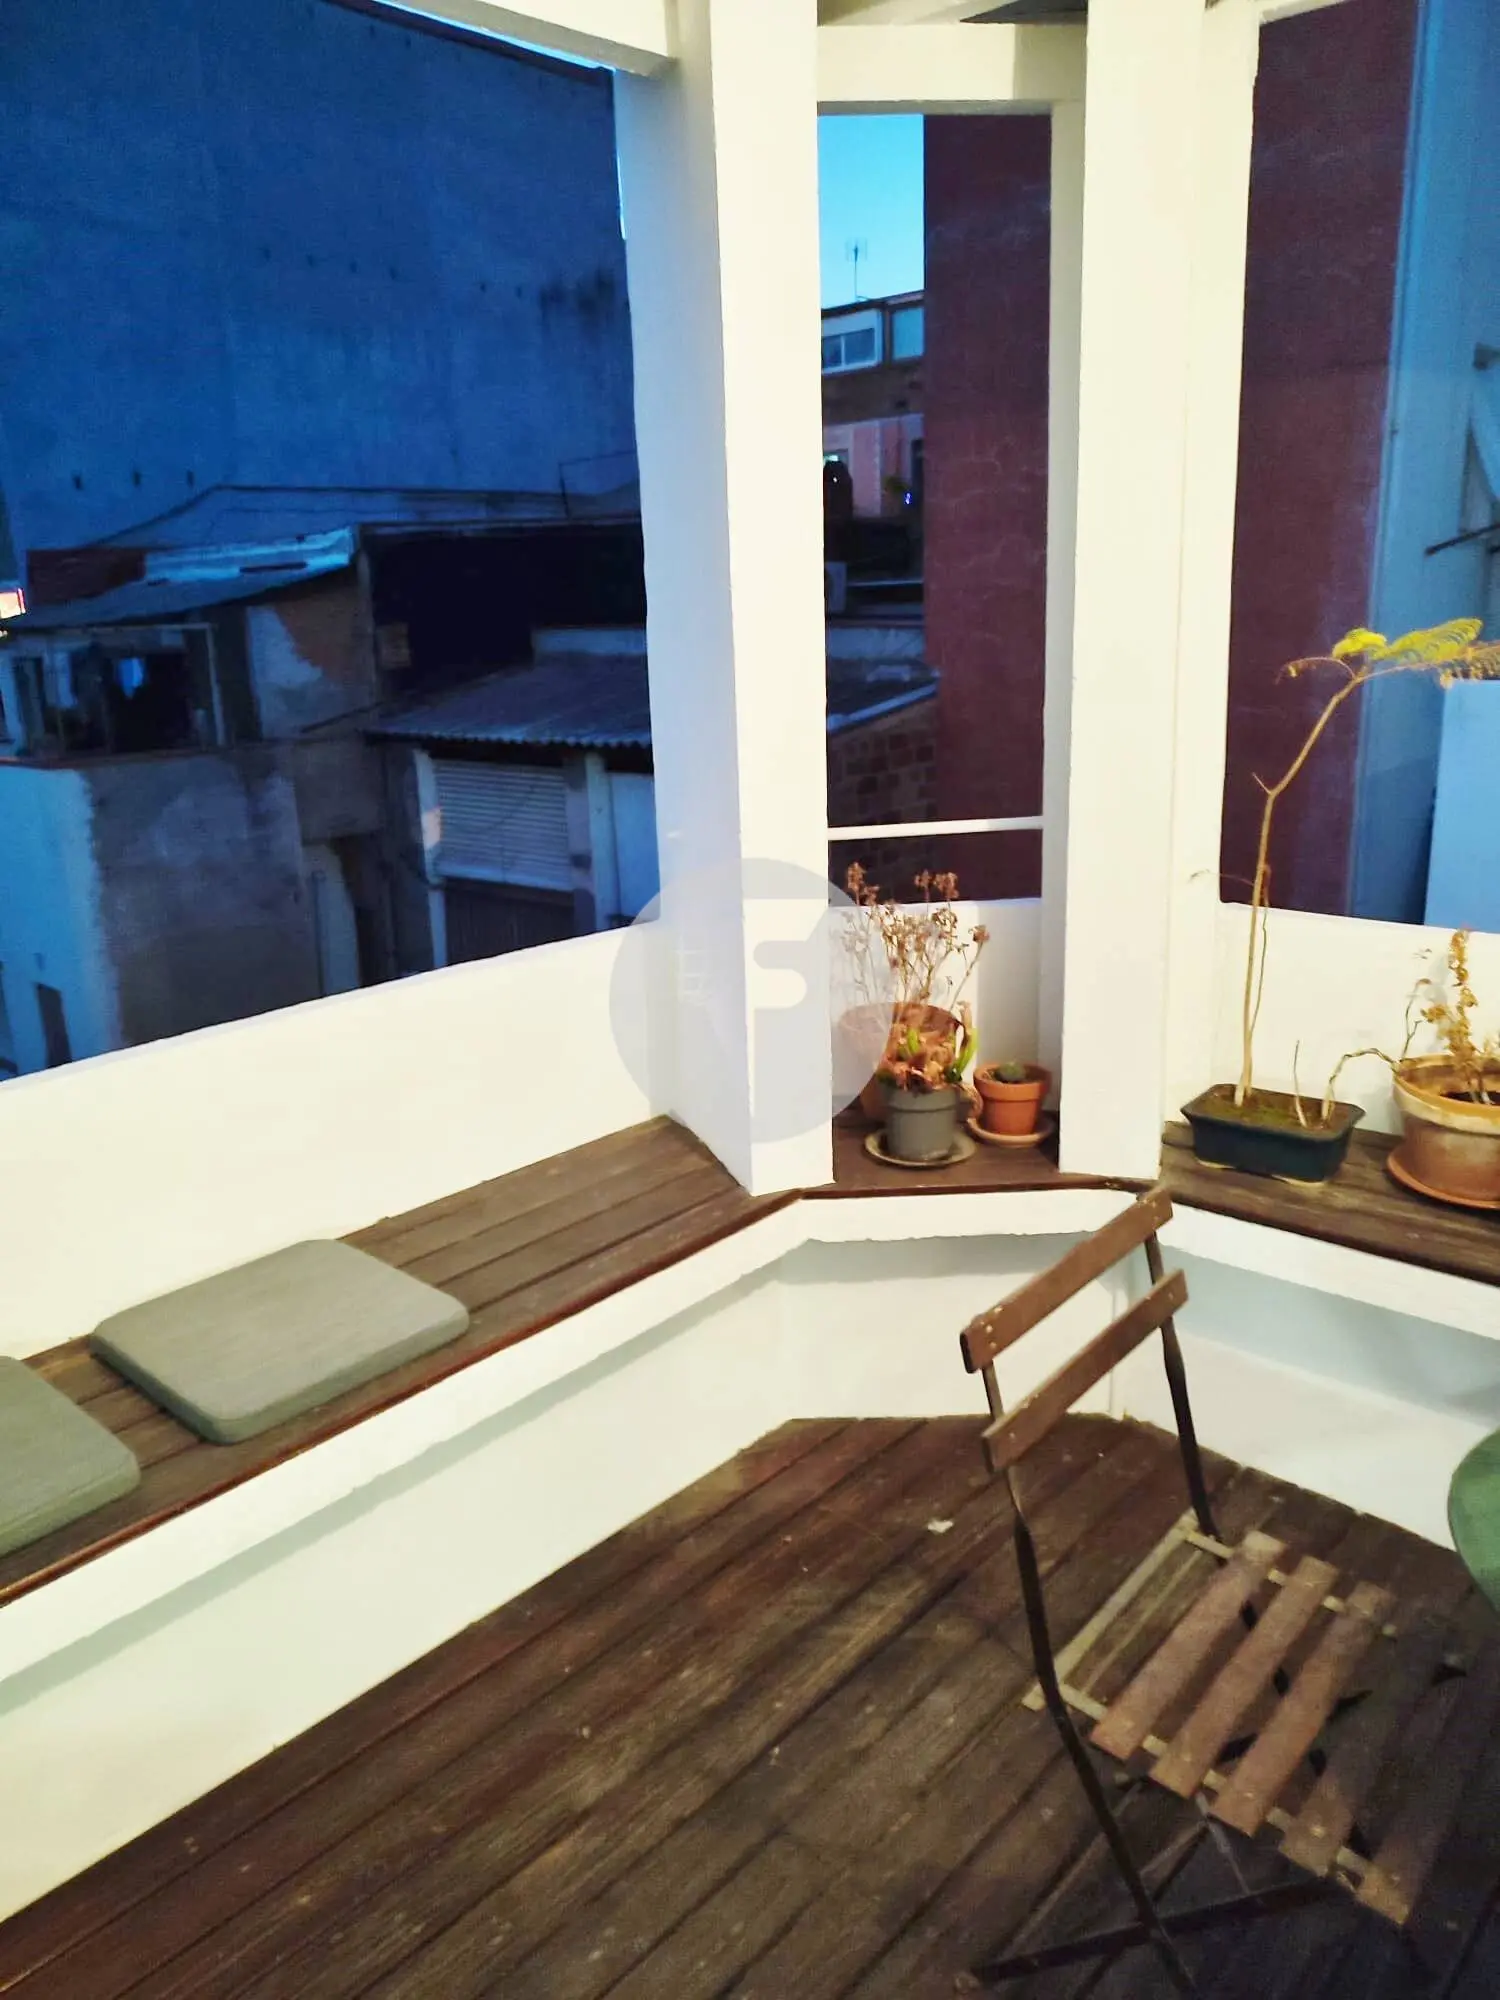 Magnificent apartment located in the Poble Sec neighborhood. 20